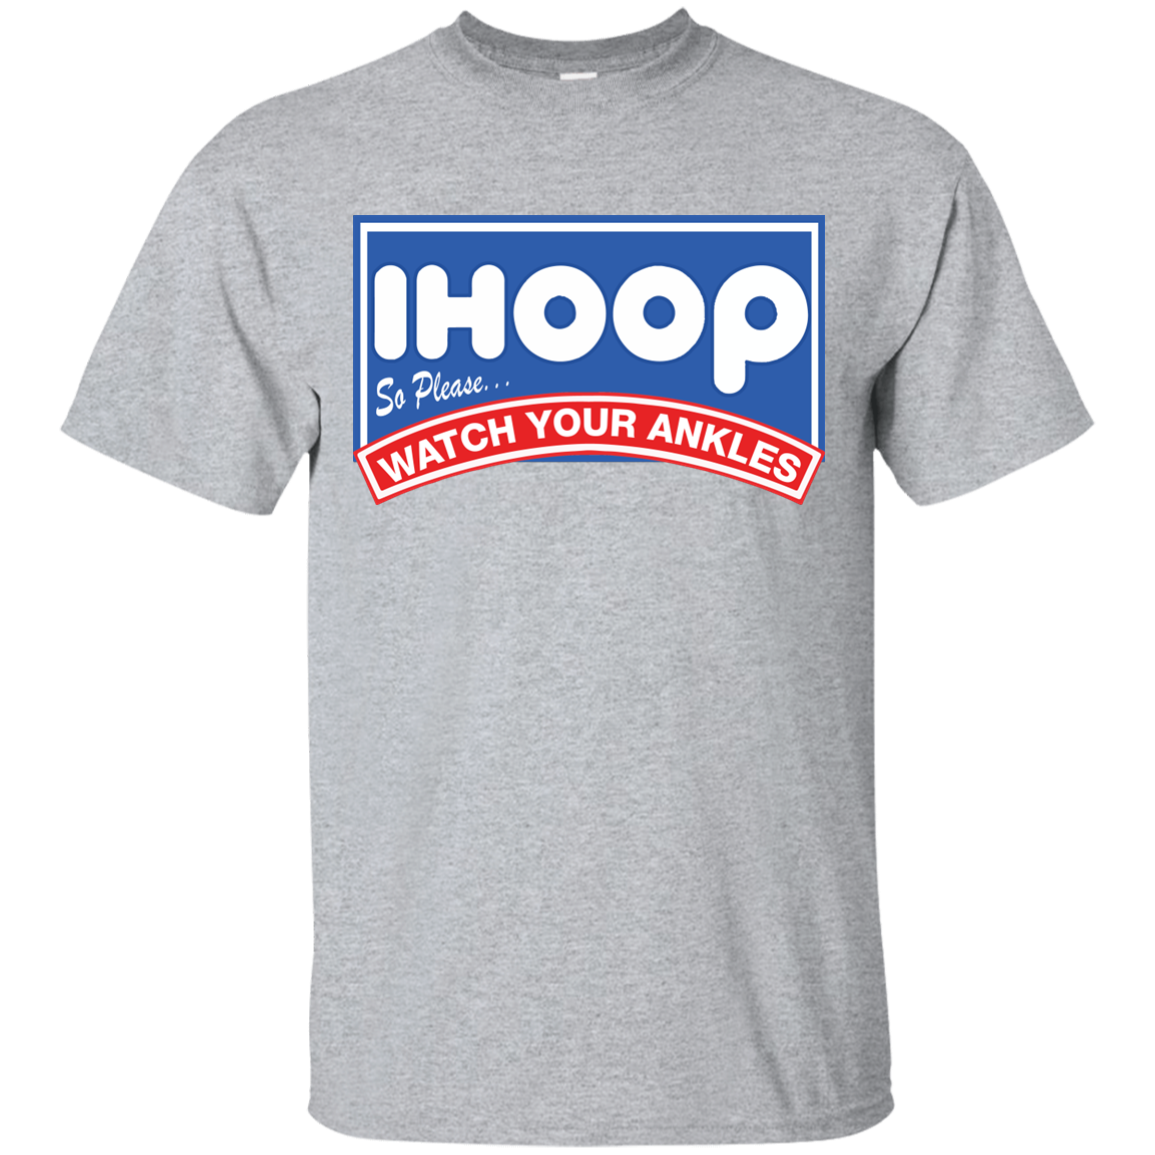 iHoop Shirt: So Please Watch Your Ankles